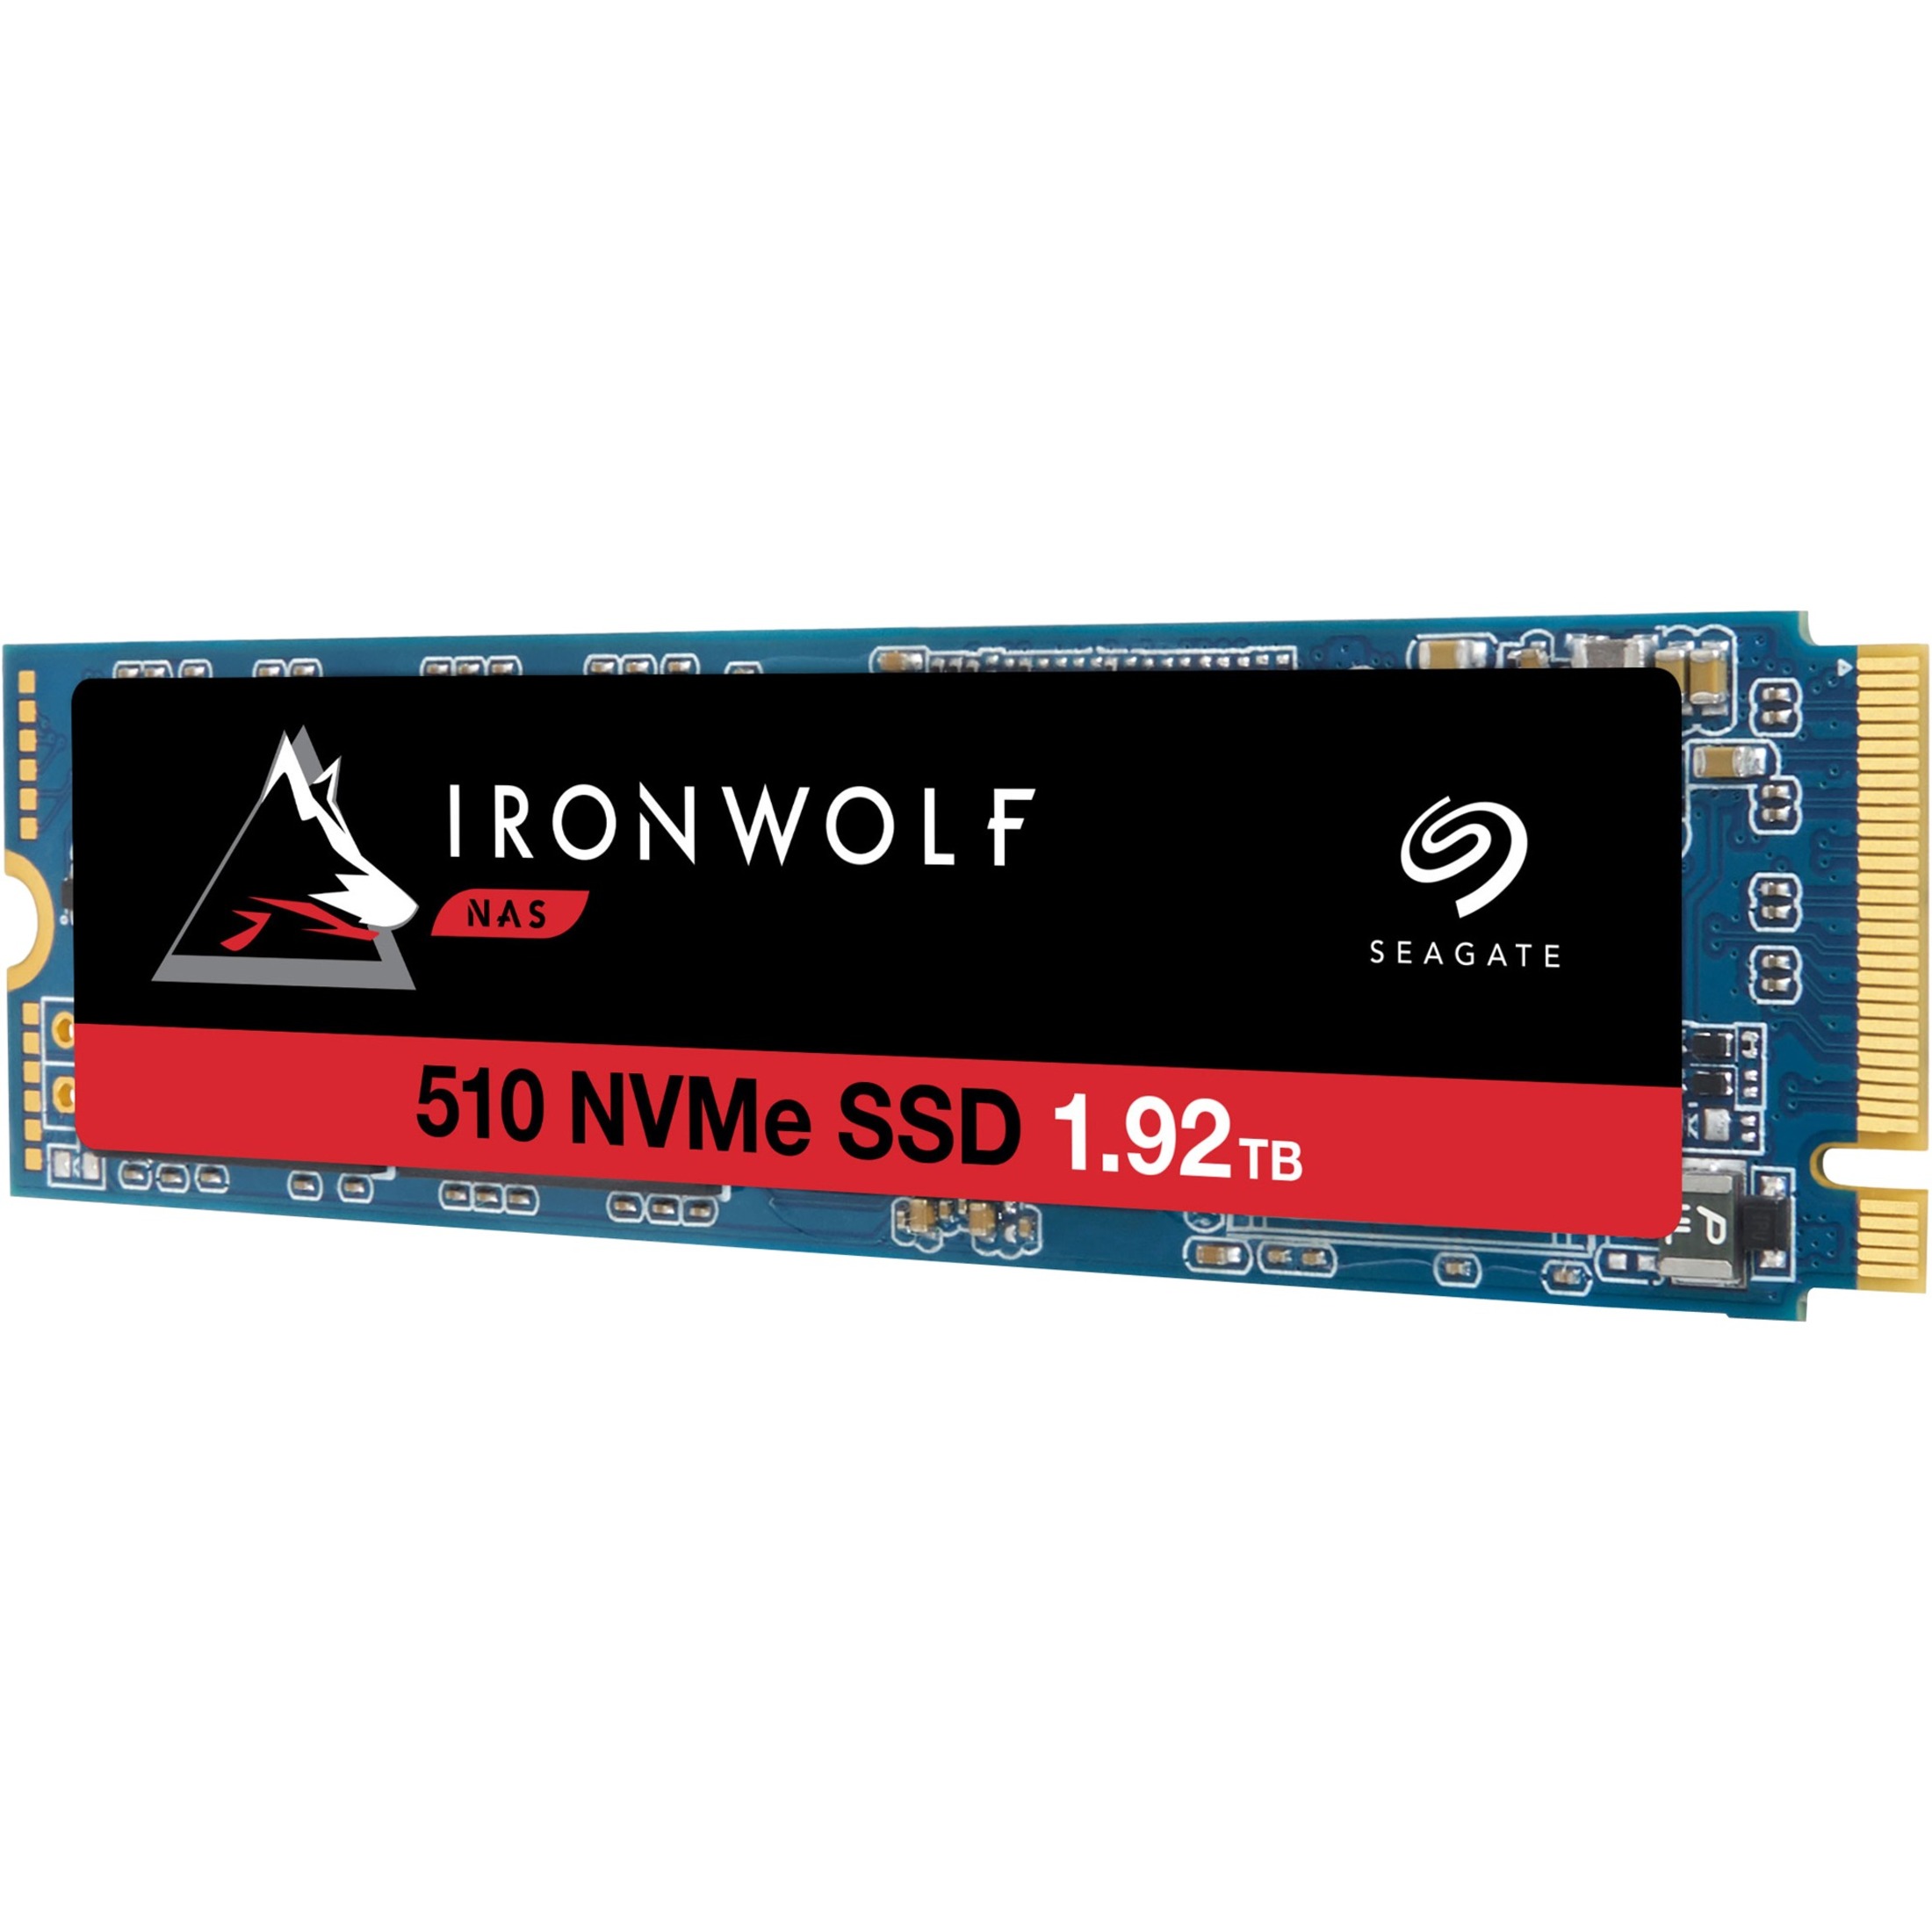 Seagate IronWolf 510 1.92TB NAS SSD Internal Solid State Drive – M.2 PCIe for Multibay RAID System Network Attached Storage (ZP1920NM30011) - image 4 of 4